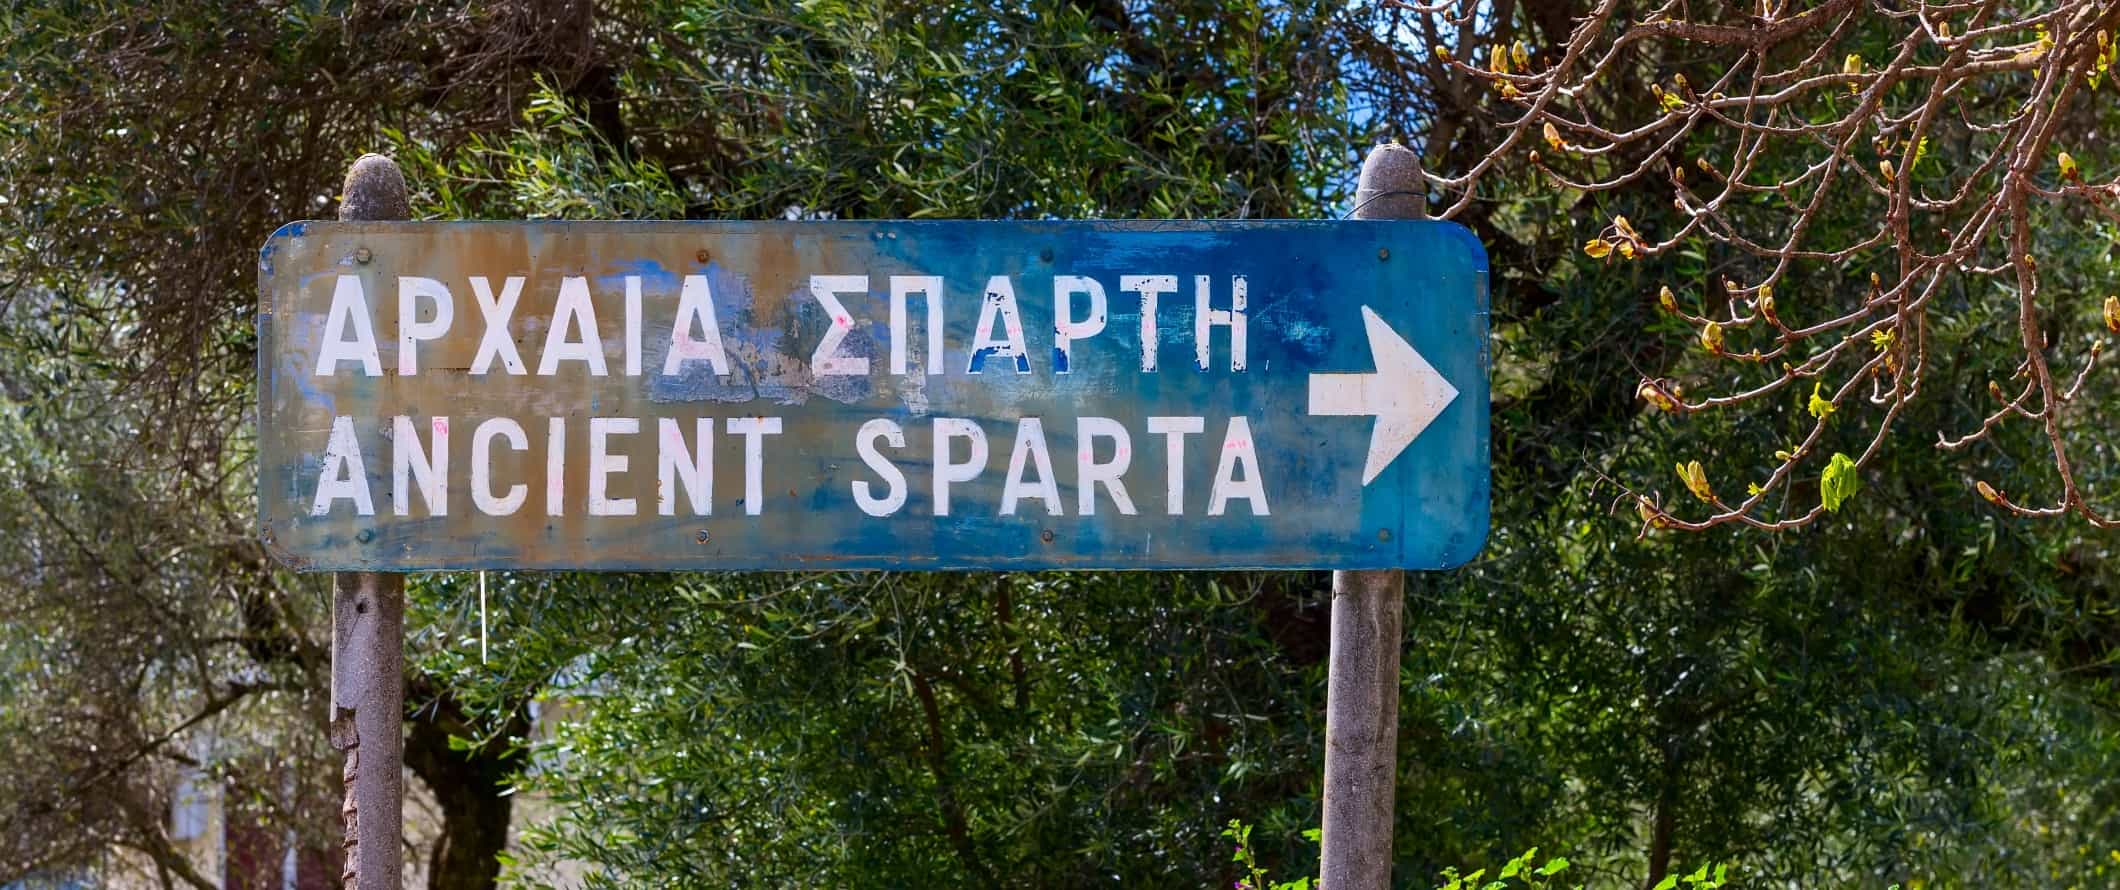 Blue road sign pointing to Ancient Sparta in Greece.